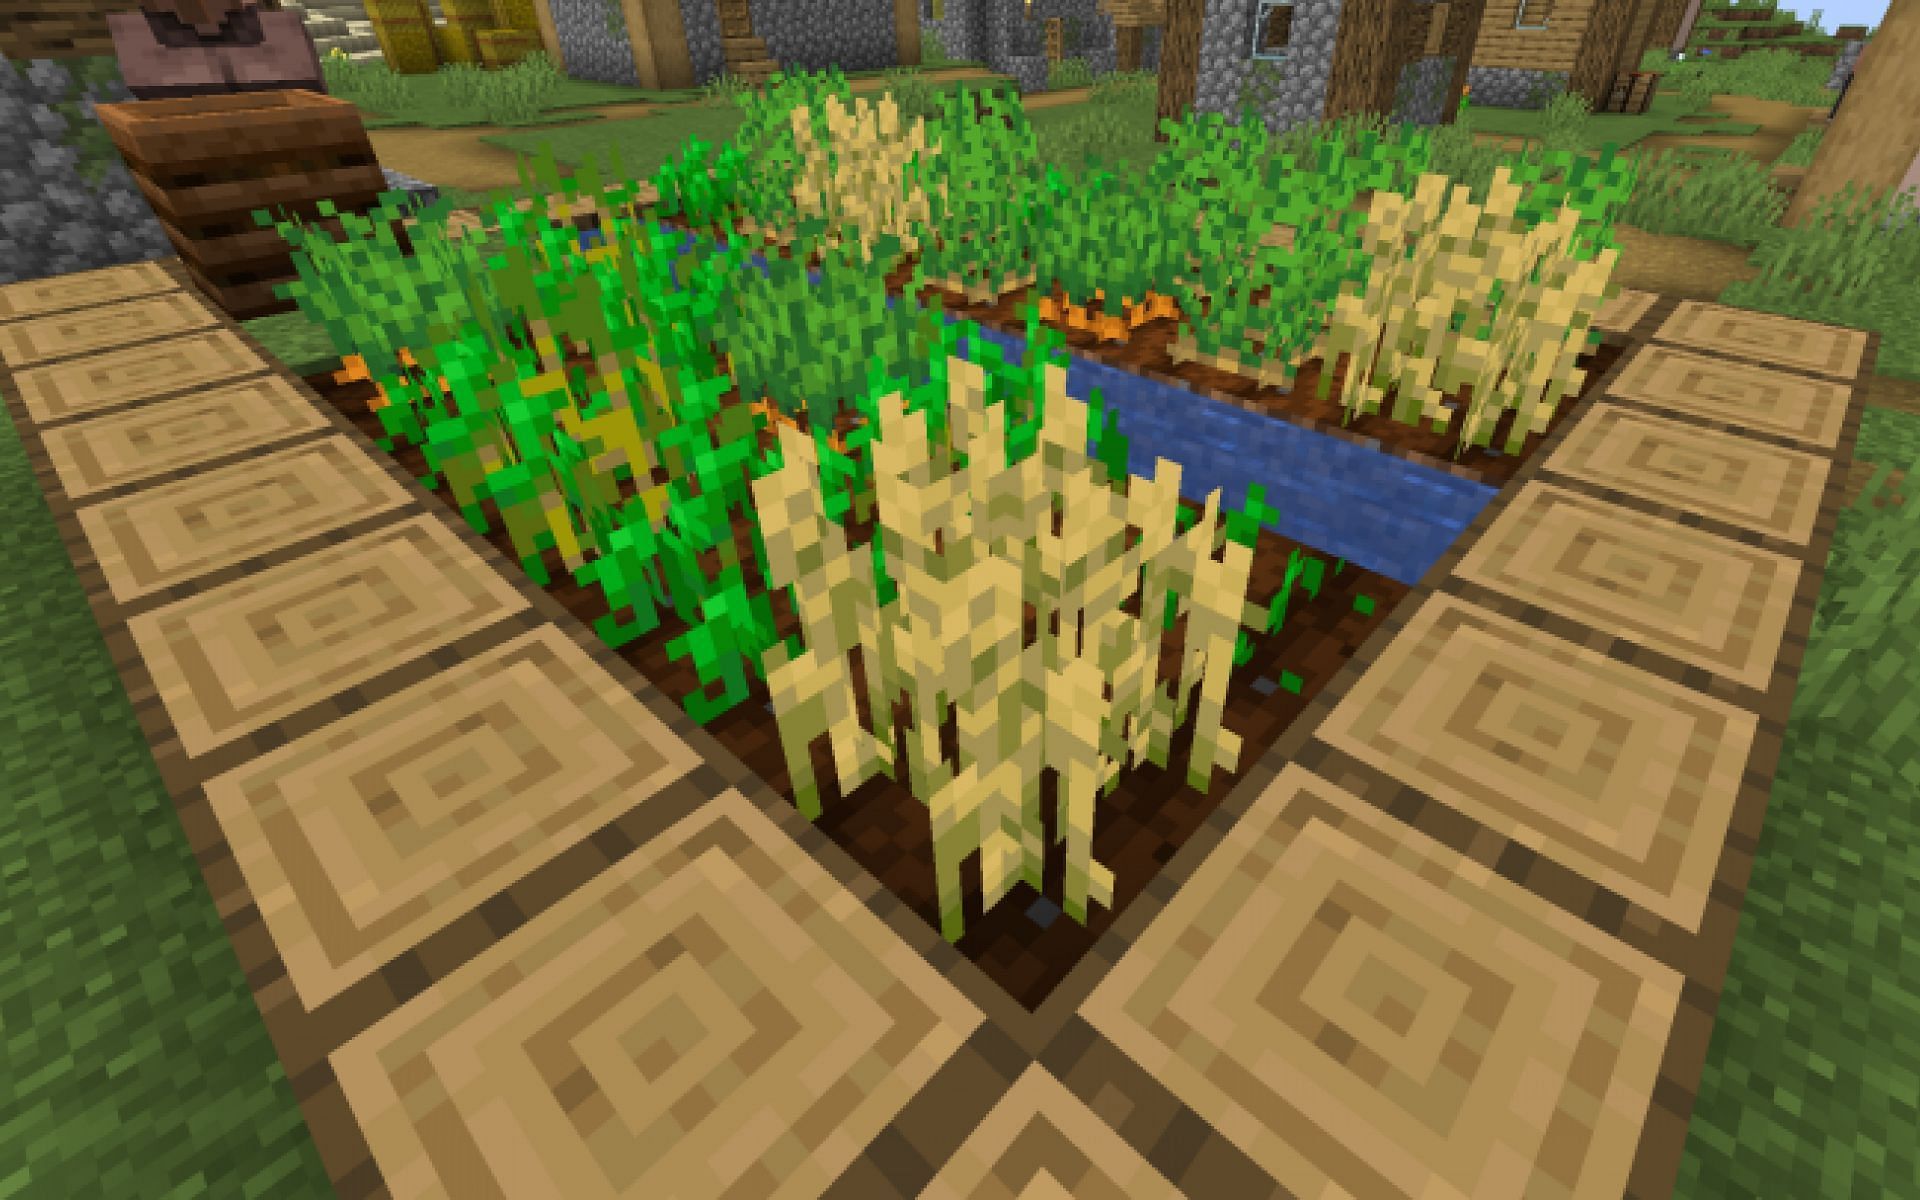 Farming is a great way of getting items like wheat, carrots, and potatoes. (Image via Minecraft)